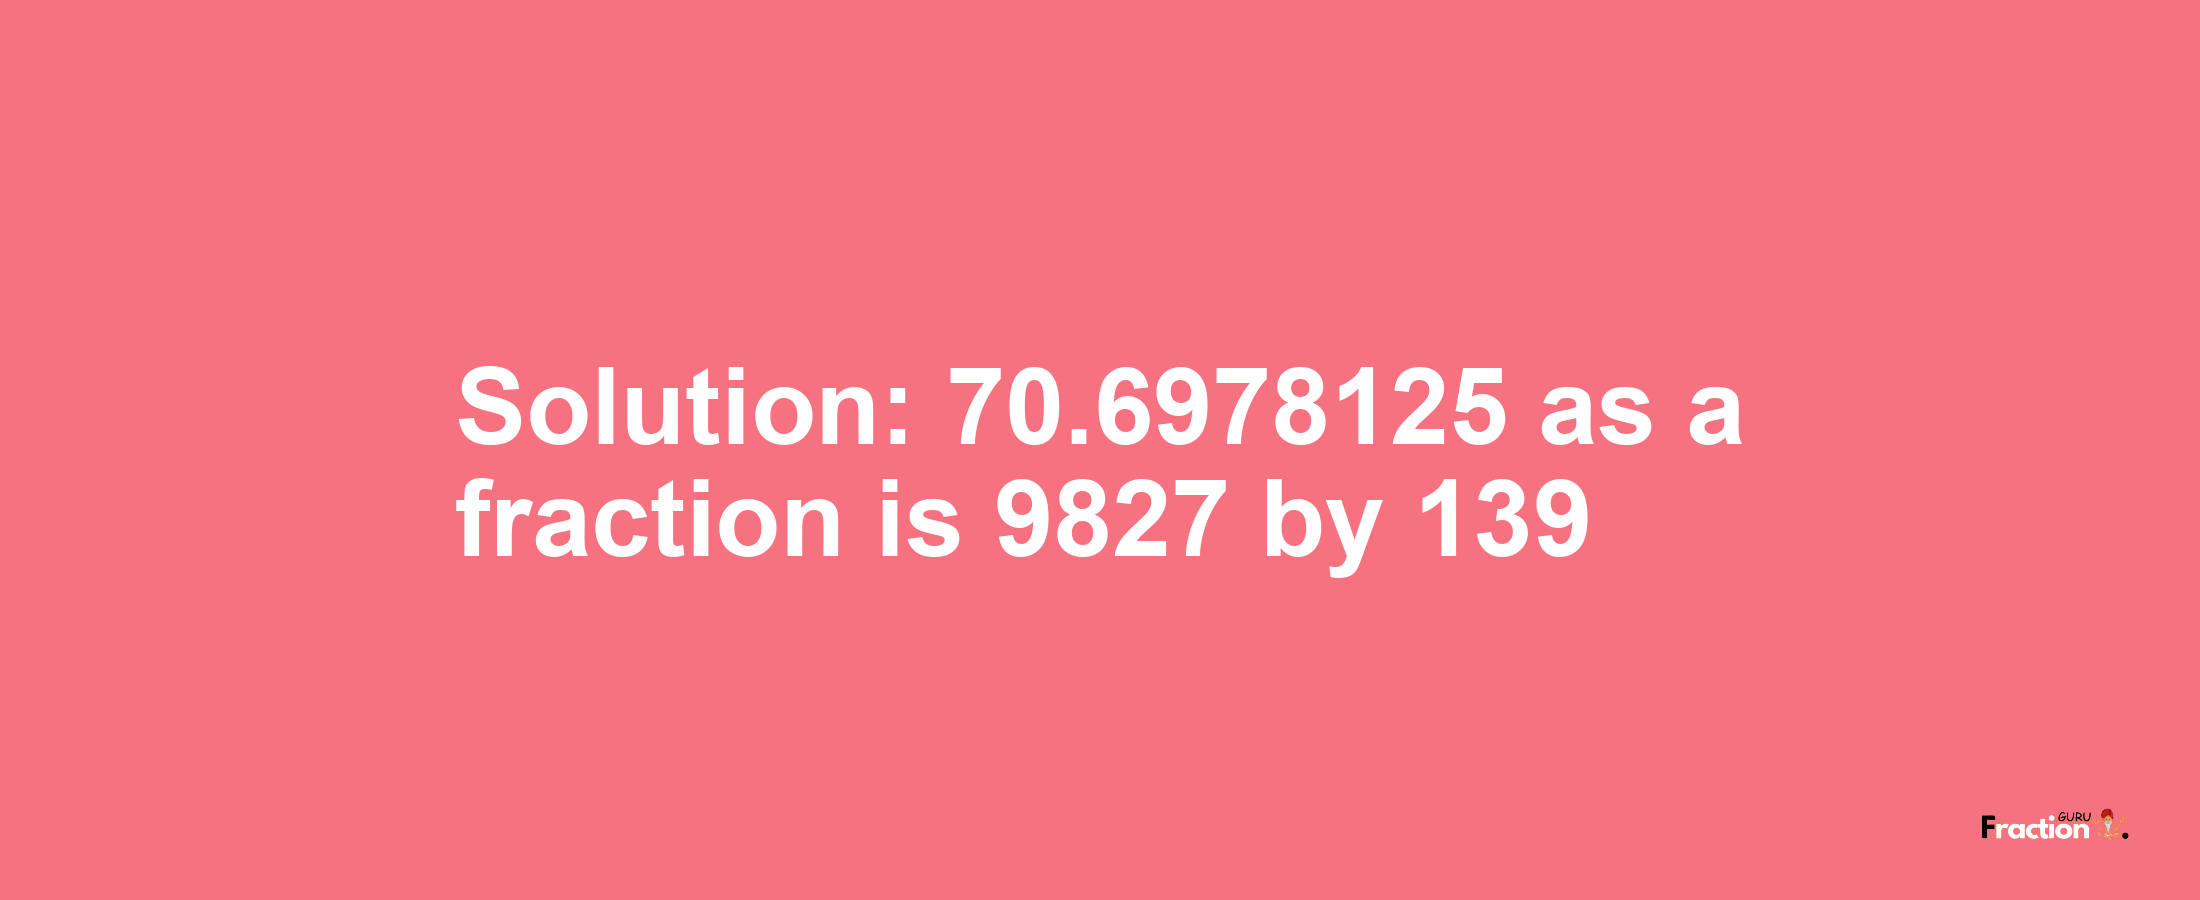 Solution:70.6978125 as a fraction is 9827/139